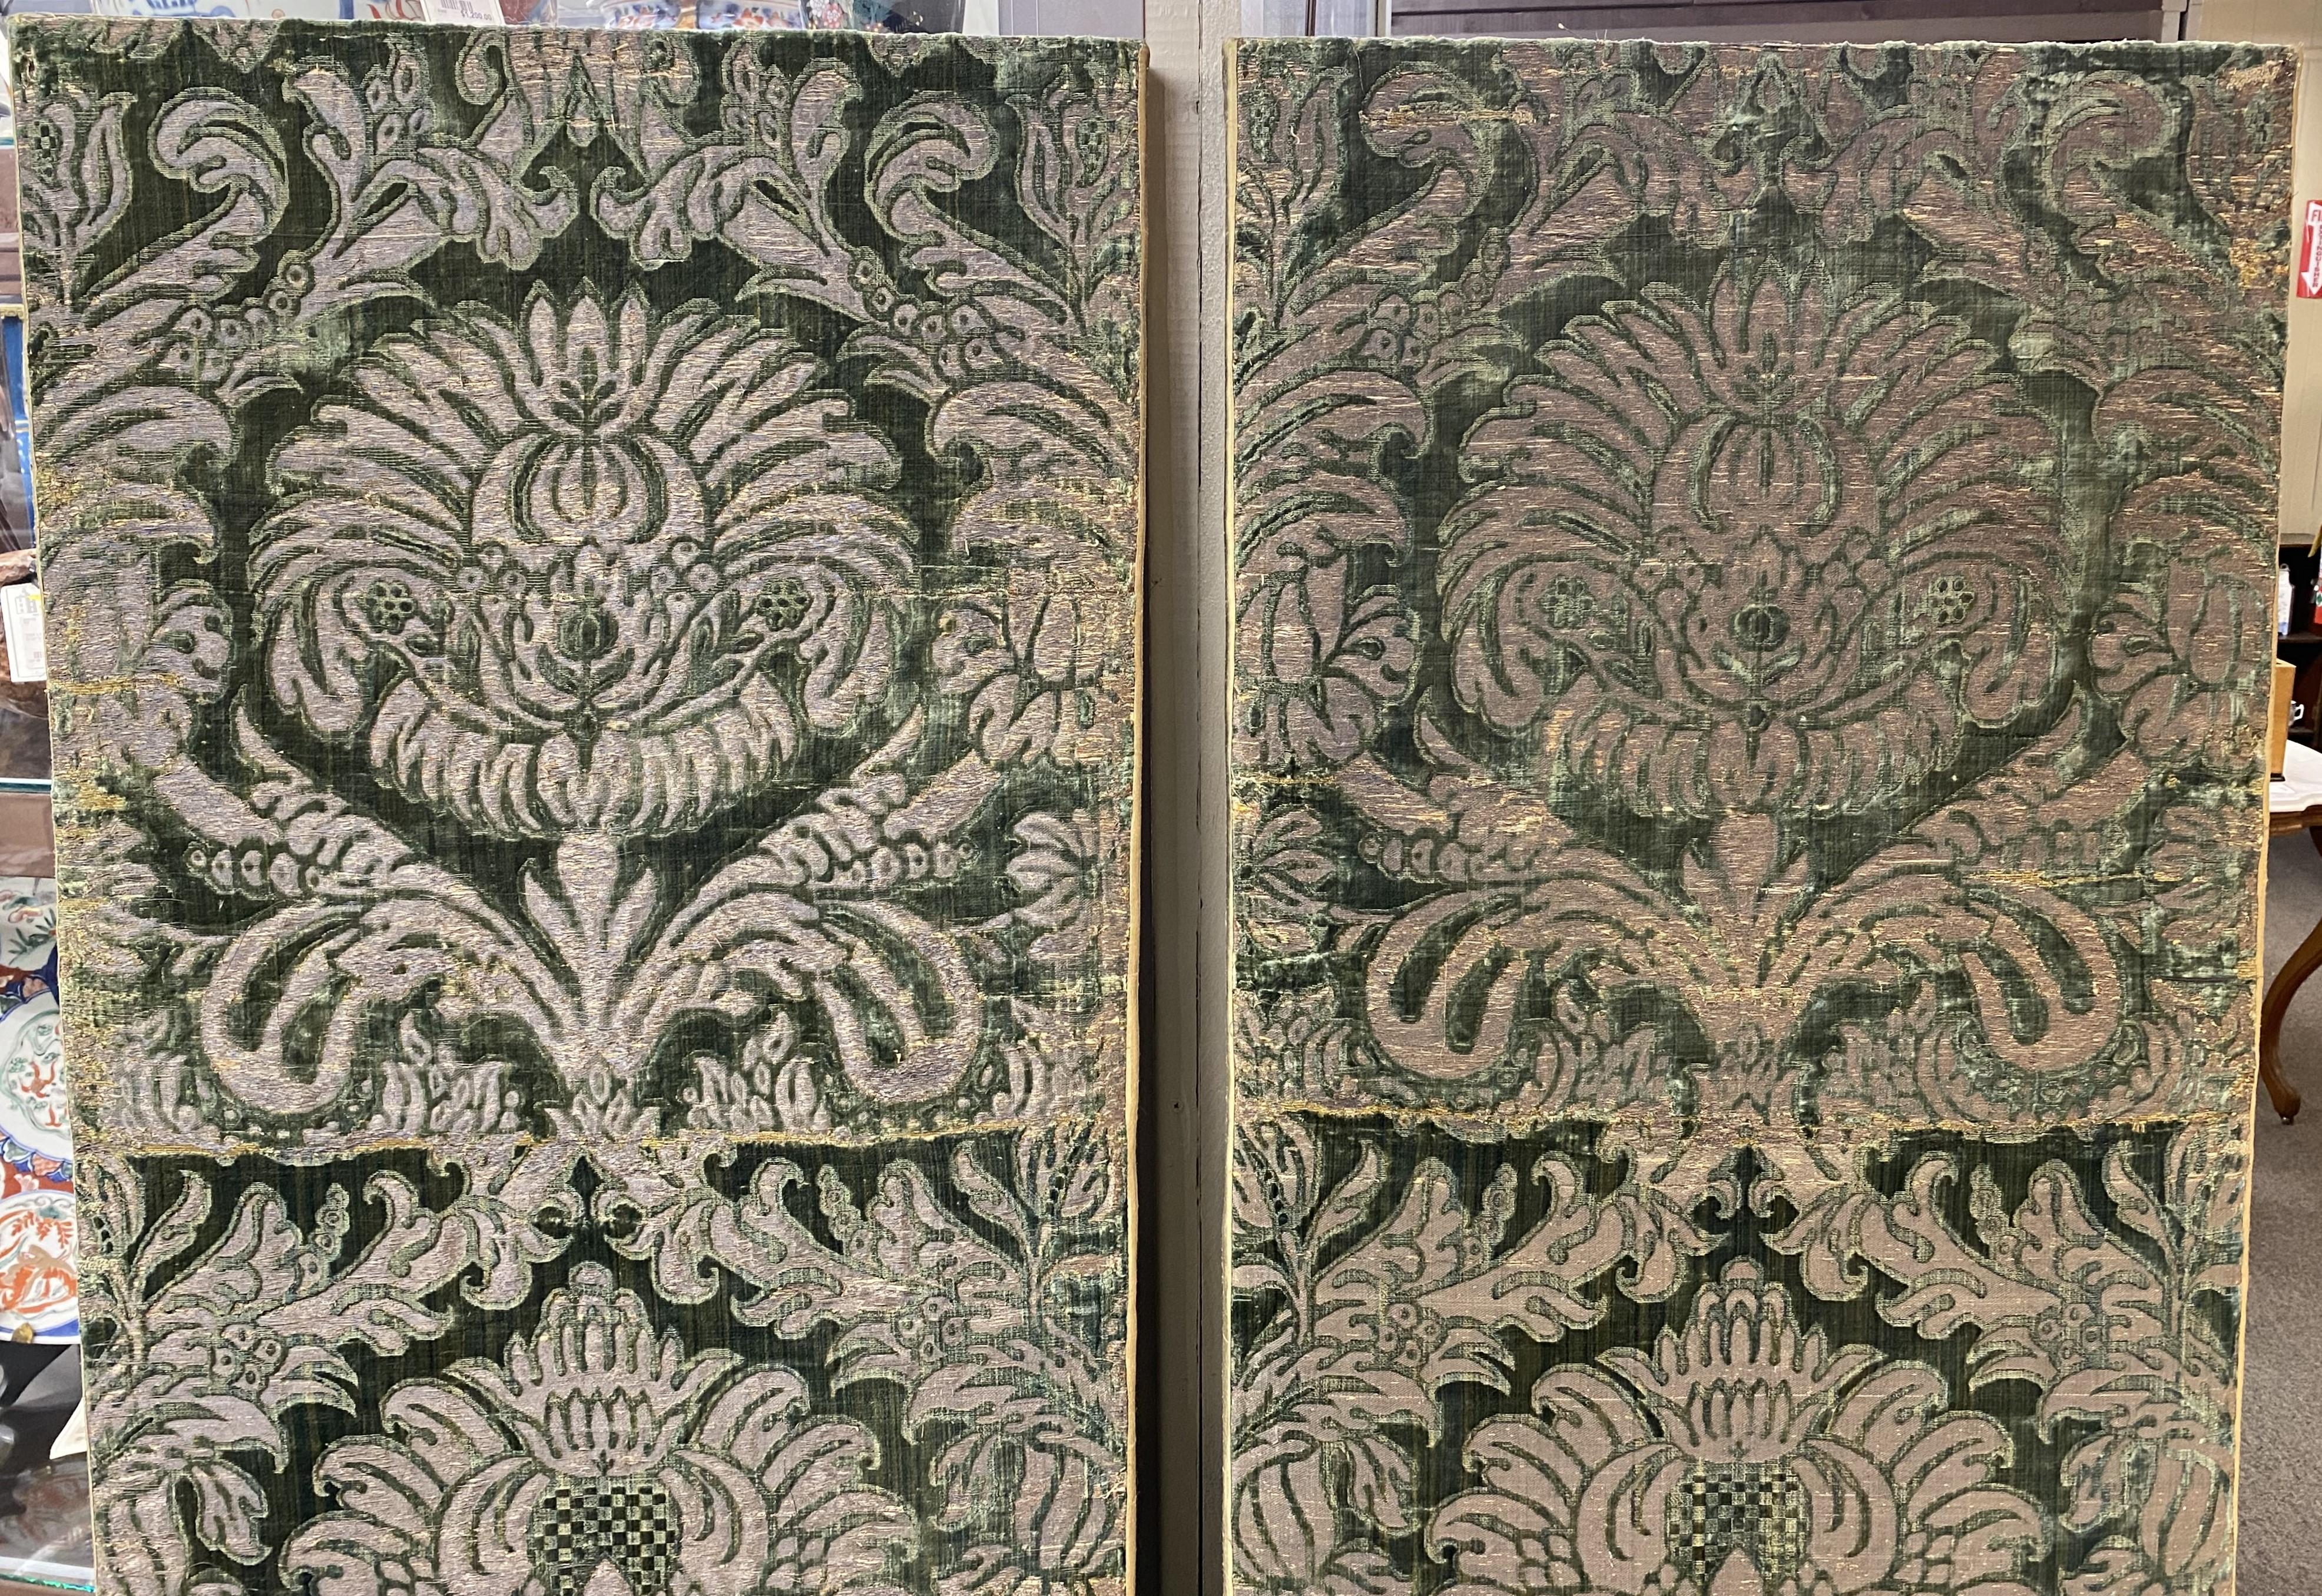 Two panels of forest green cut silk velvet with silver metal thread from Florence Italy, circa 1600-1650 with a very large floral motif rising up out of an urn. Both mounted separately on modern stretchers and edged with modern silk fabric. Fabrics